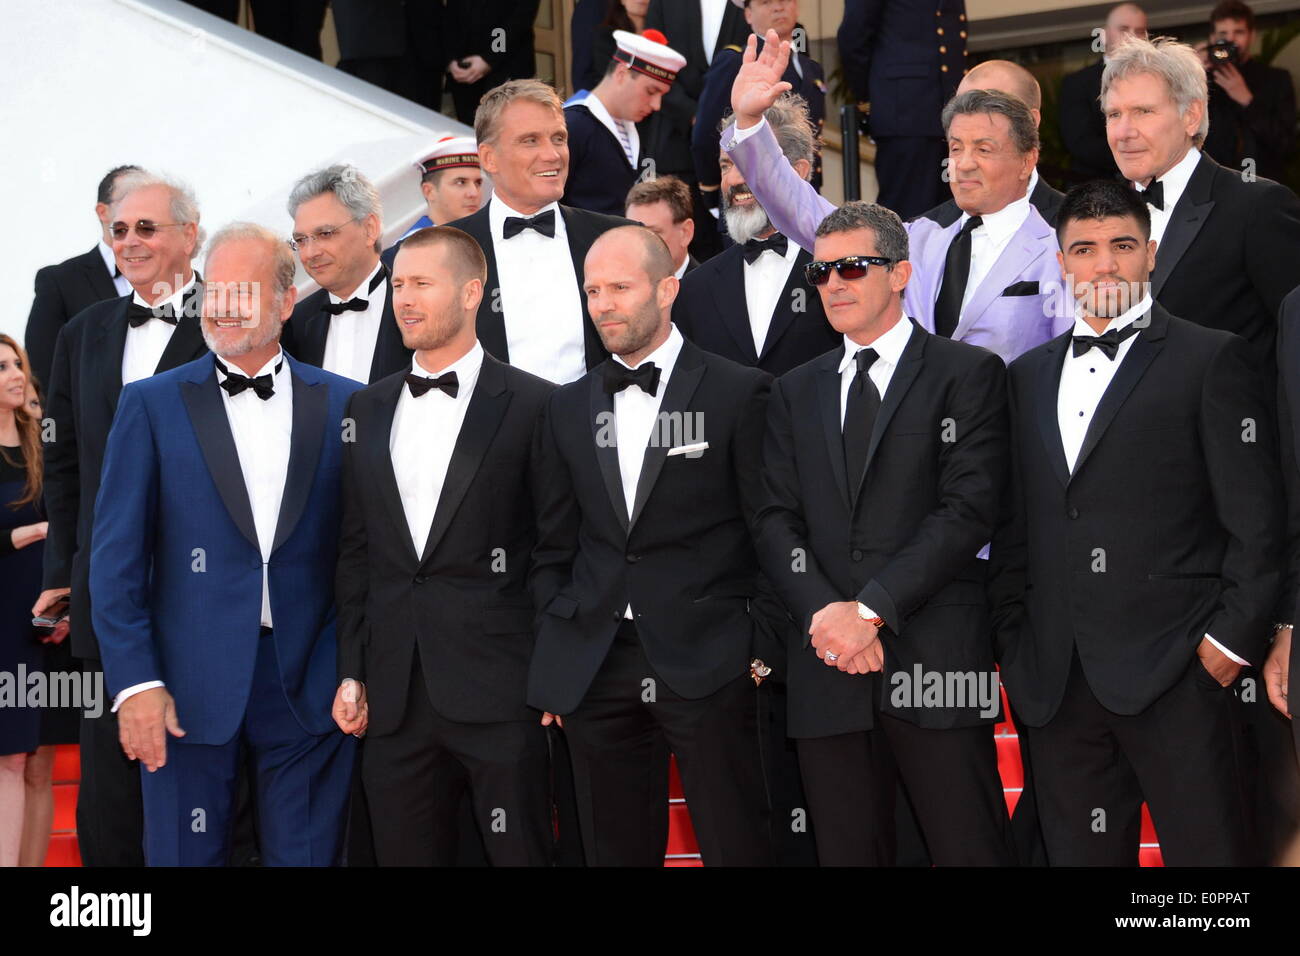 May 18, 2014 - Cannes, France - CANNES, FRANCE - MAY 18: (Top L-R) Actors Glen Powell, Kelsey Grammer, Dolph Lundgren, Harrison Ford, director Patrick Hughes, actors Antonio Banderas, Randy Couture (Front L-R) Victor Ortiz, Mel Gibson, Jason Statham, Sylvester Stallone, Ronda Rousey, Wesley Snipes and Kellan Lutz, attend 'Expendables 3' Premiere at the 67th Annual Cannes Film Festival on May 18, 2014 in Cannes, France. (Credit Image: © Frederick Injimbert/ZUMAPRESS.com) Stock Photo